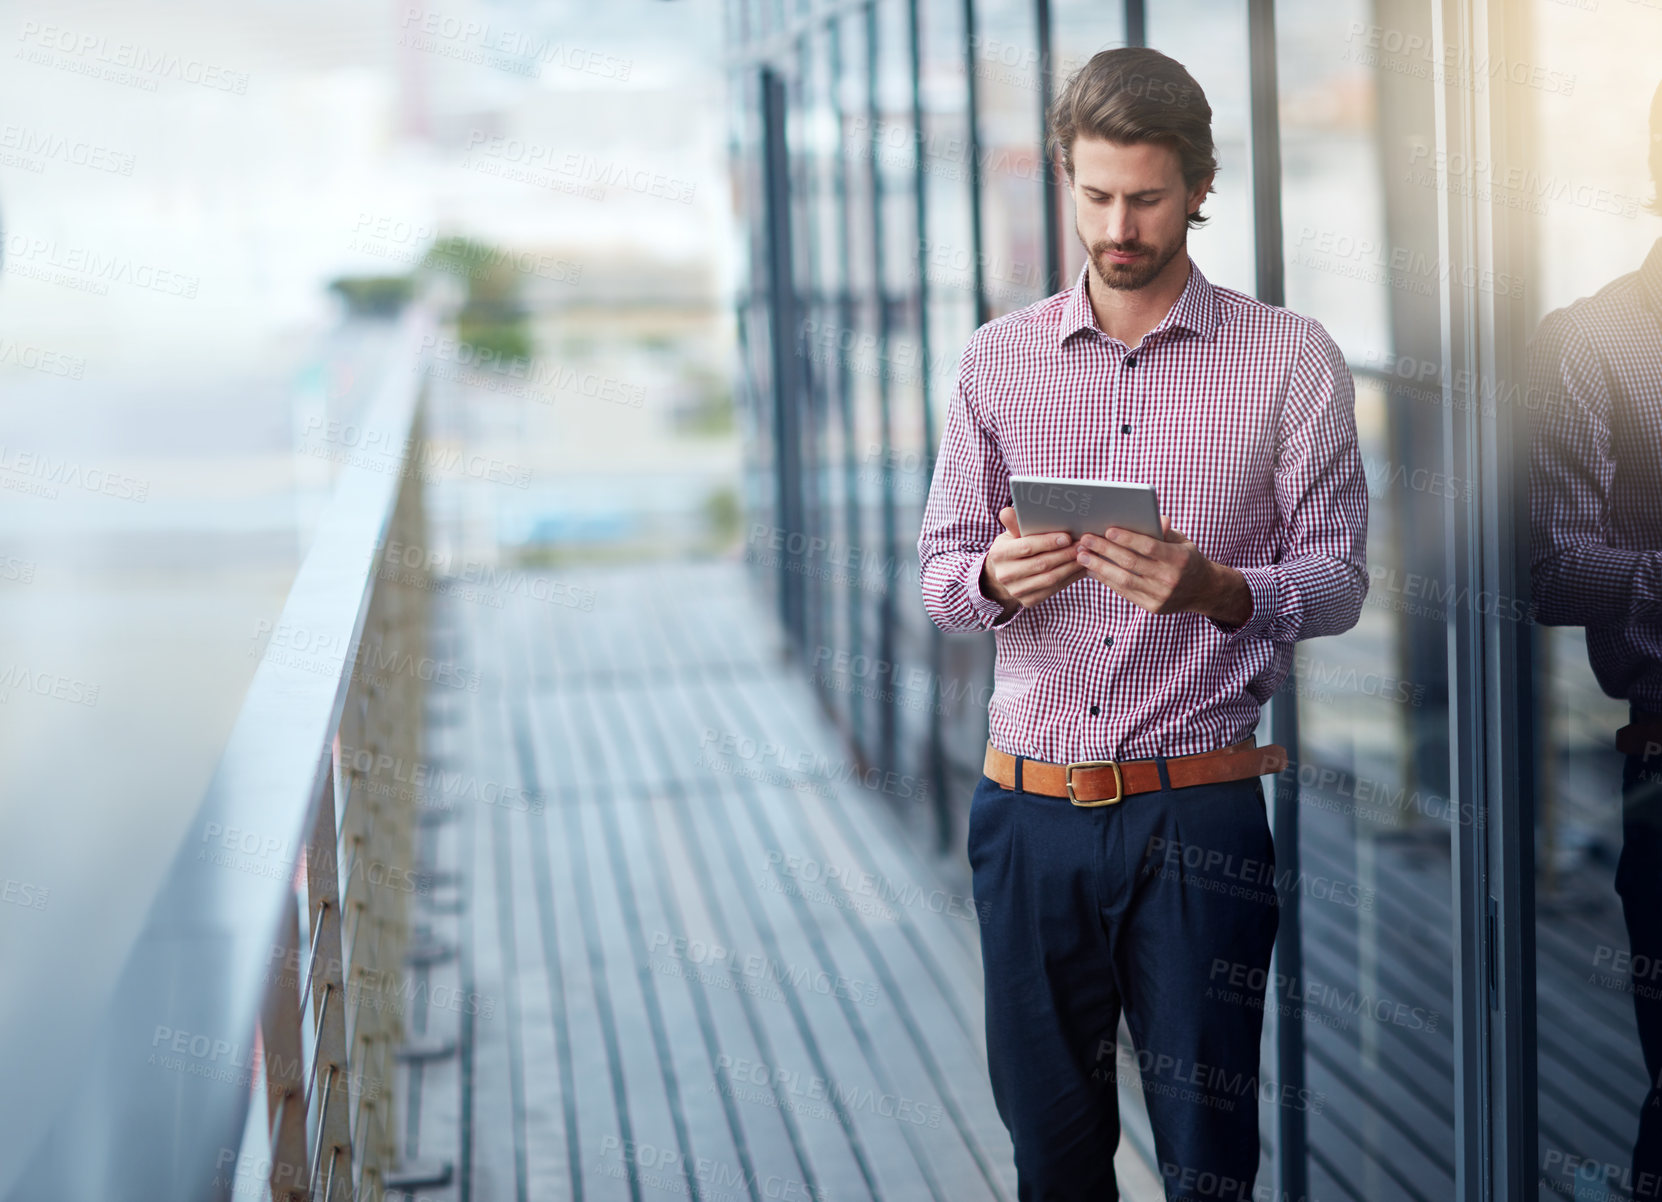 Buy stock photo Shot of a young businessman using a digital tablet outside of an office building